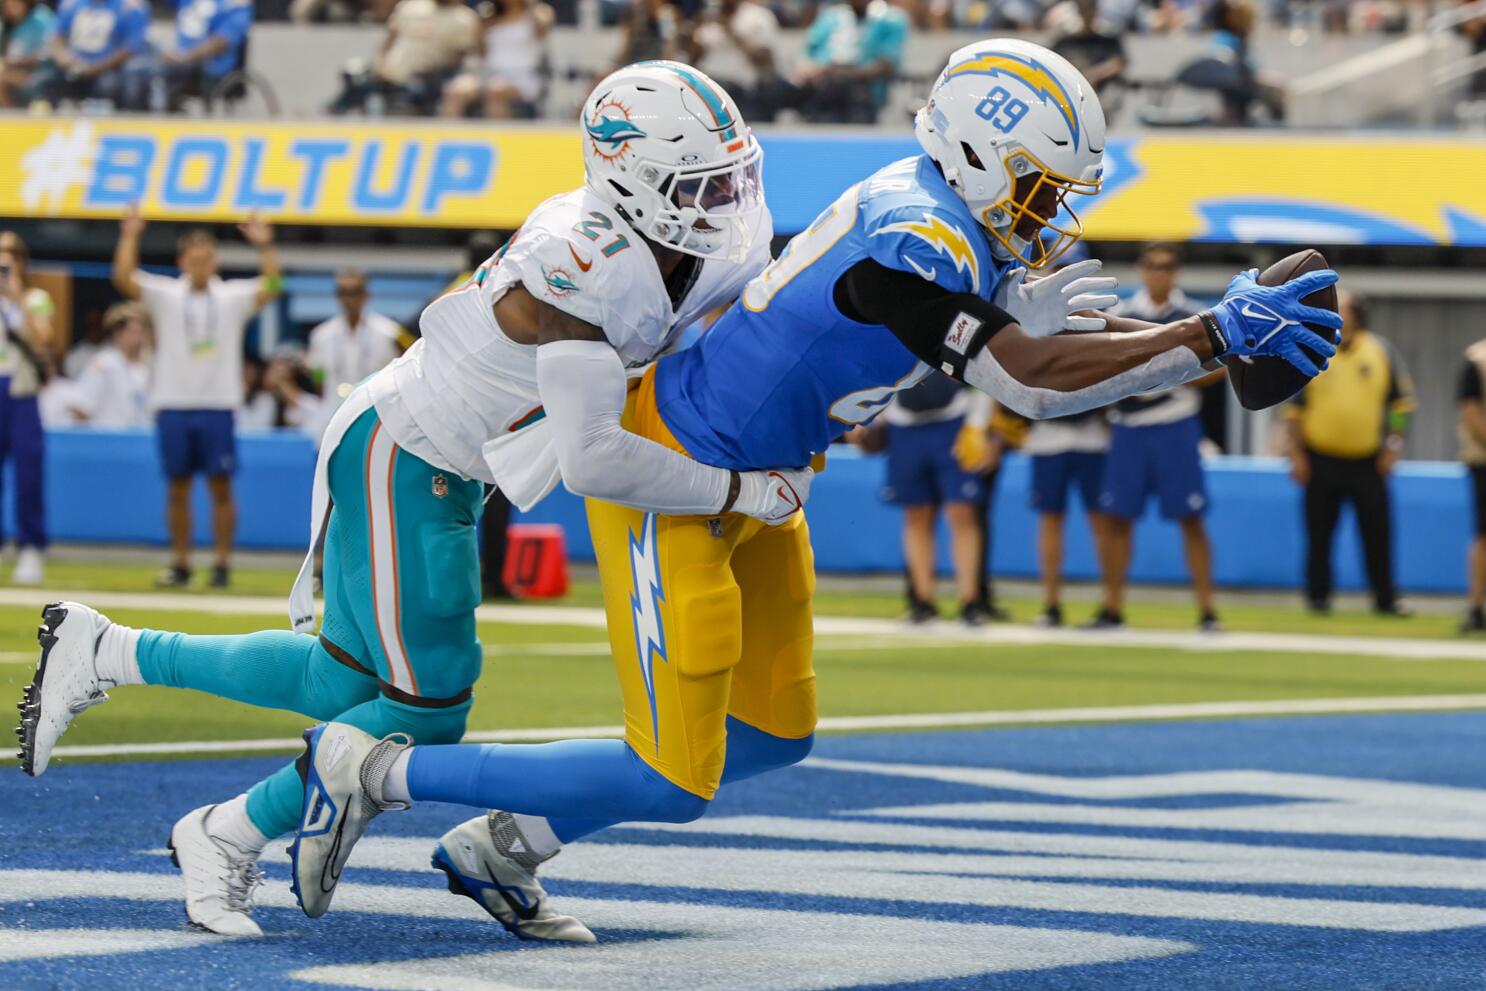 Defense lets down Chargers as Dolphins win season opener, 36-34